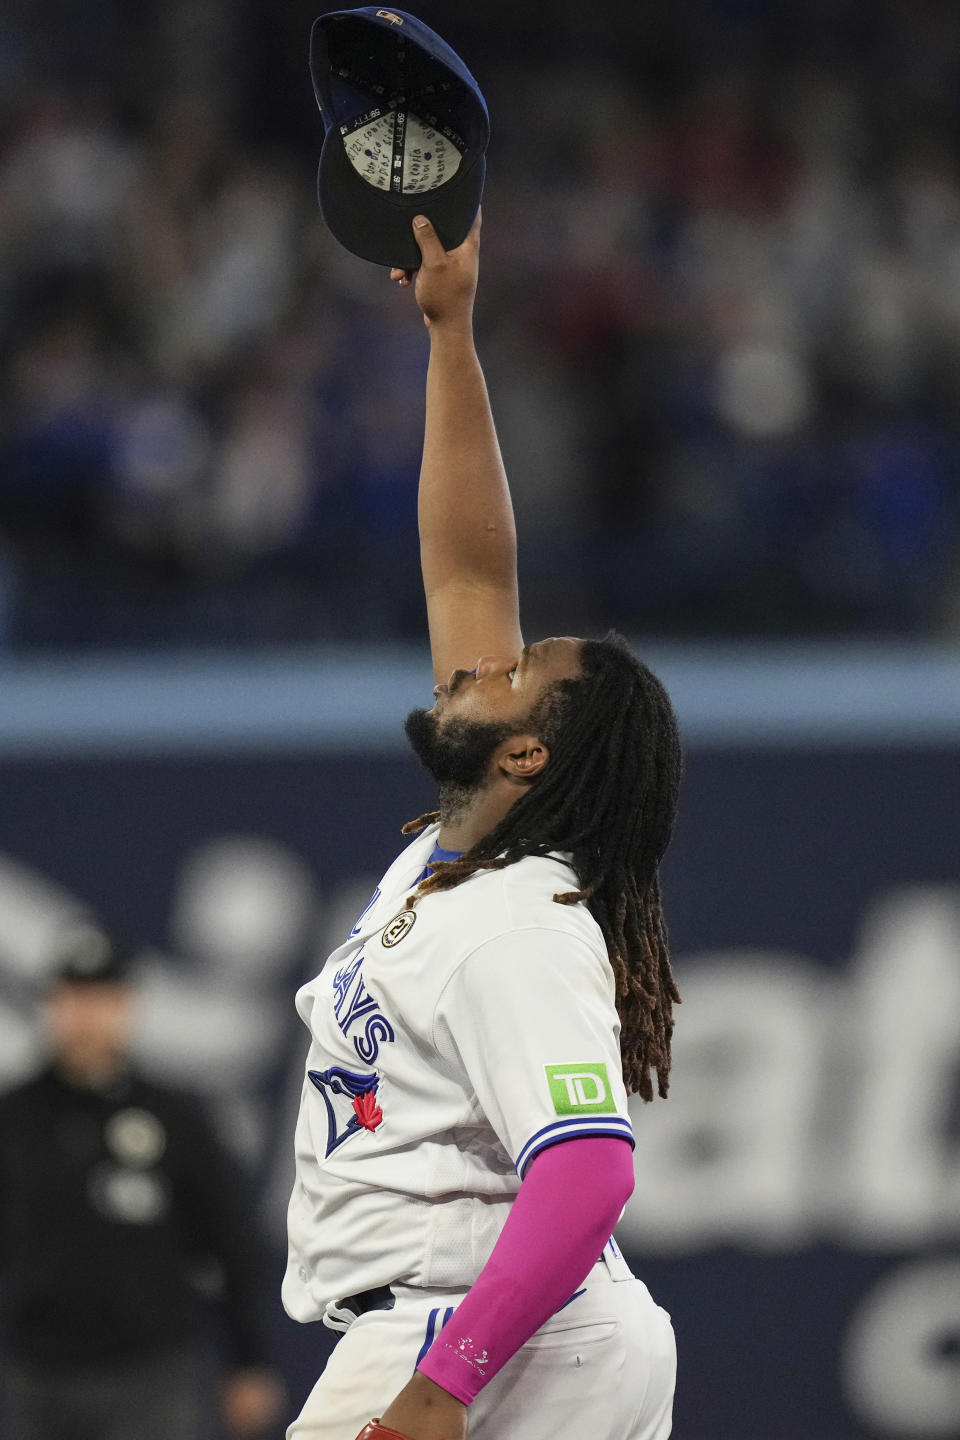 Toronto Blue Jays' Vladimir Guerrero Jr. celebrates after defeating the Boston Red Sox in a baseball game in Toronto, Friday, Sept. 15, 2023. (Chris Young/The Canadian Press via AP)